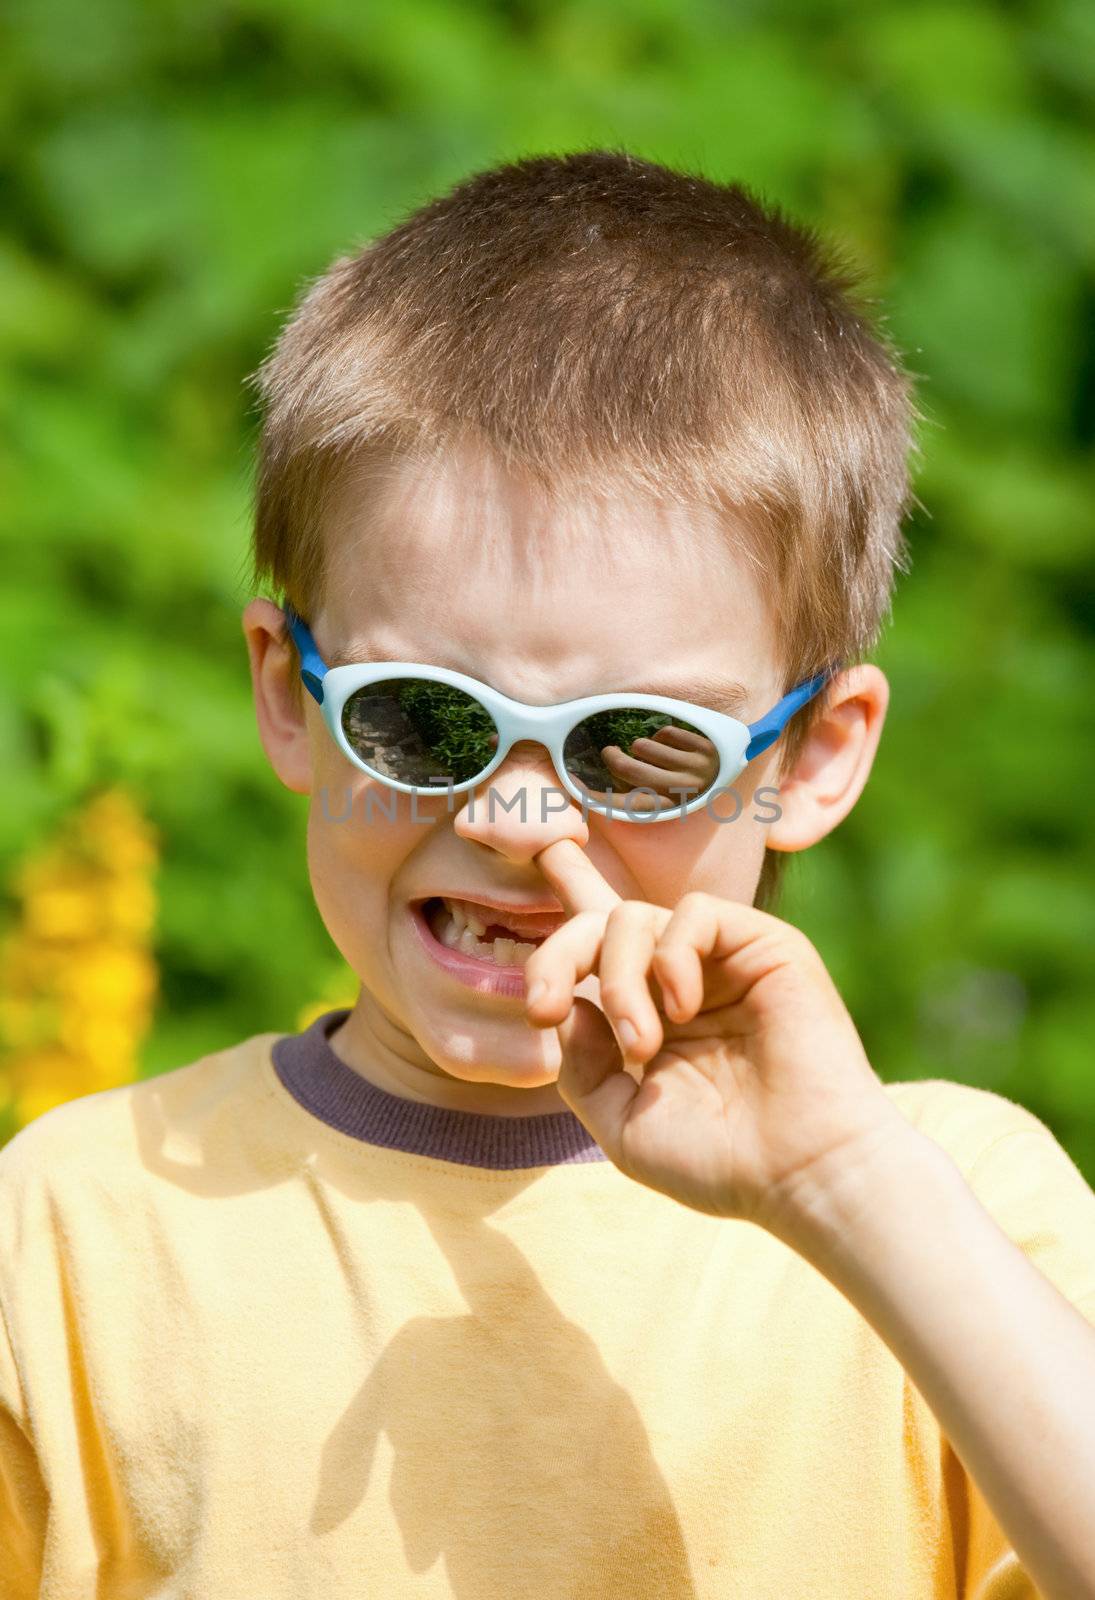 Portrait of a young boy wearing sunglasses picking his nose